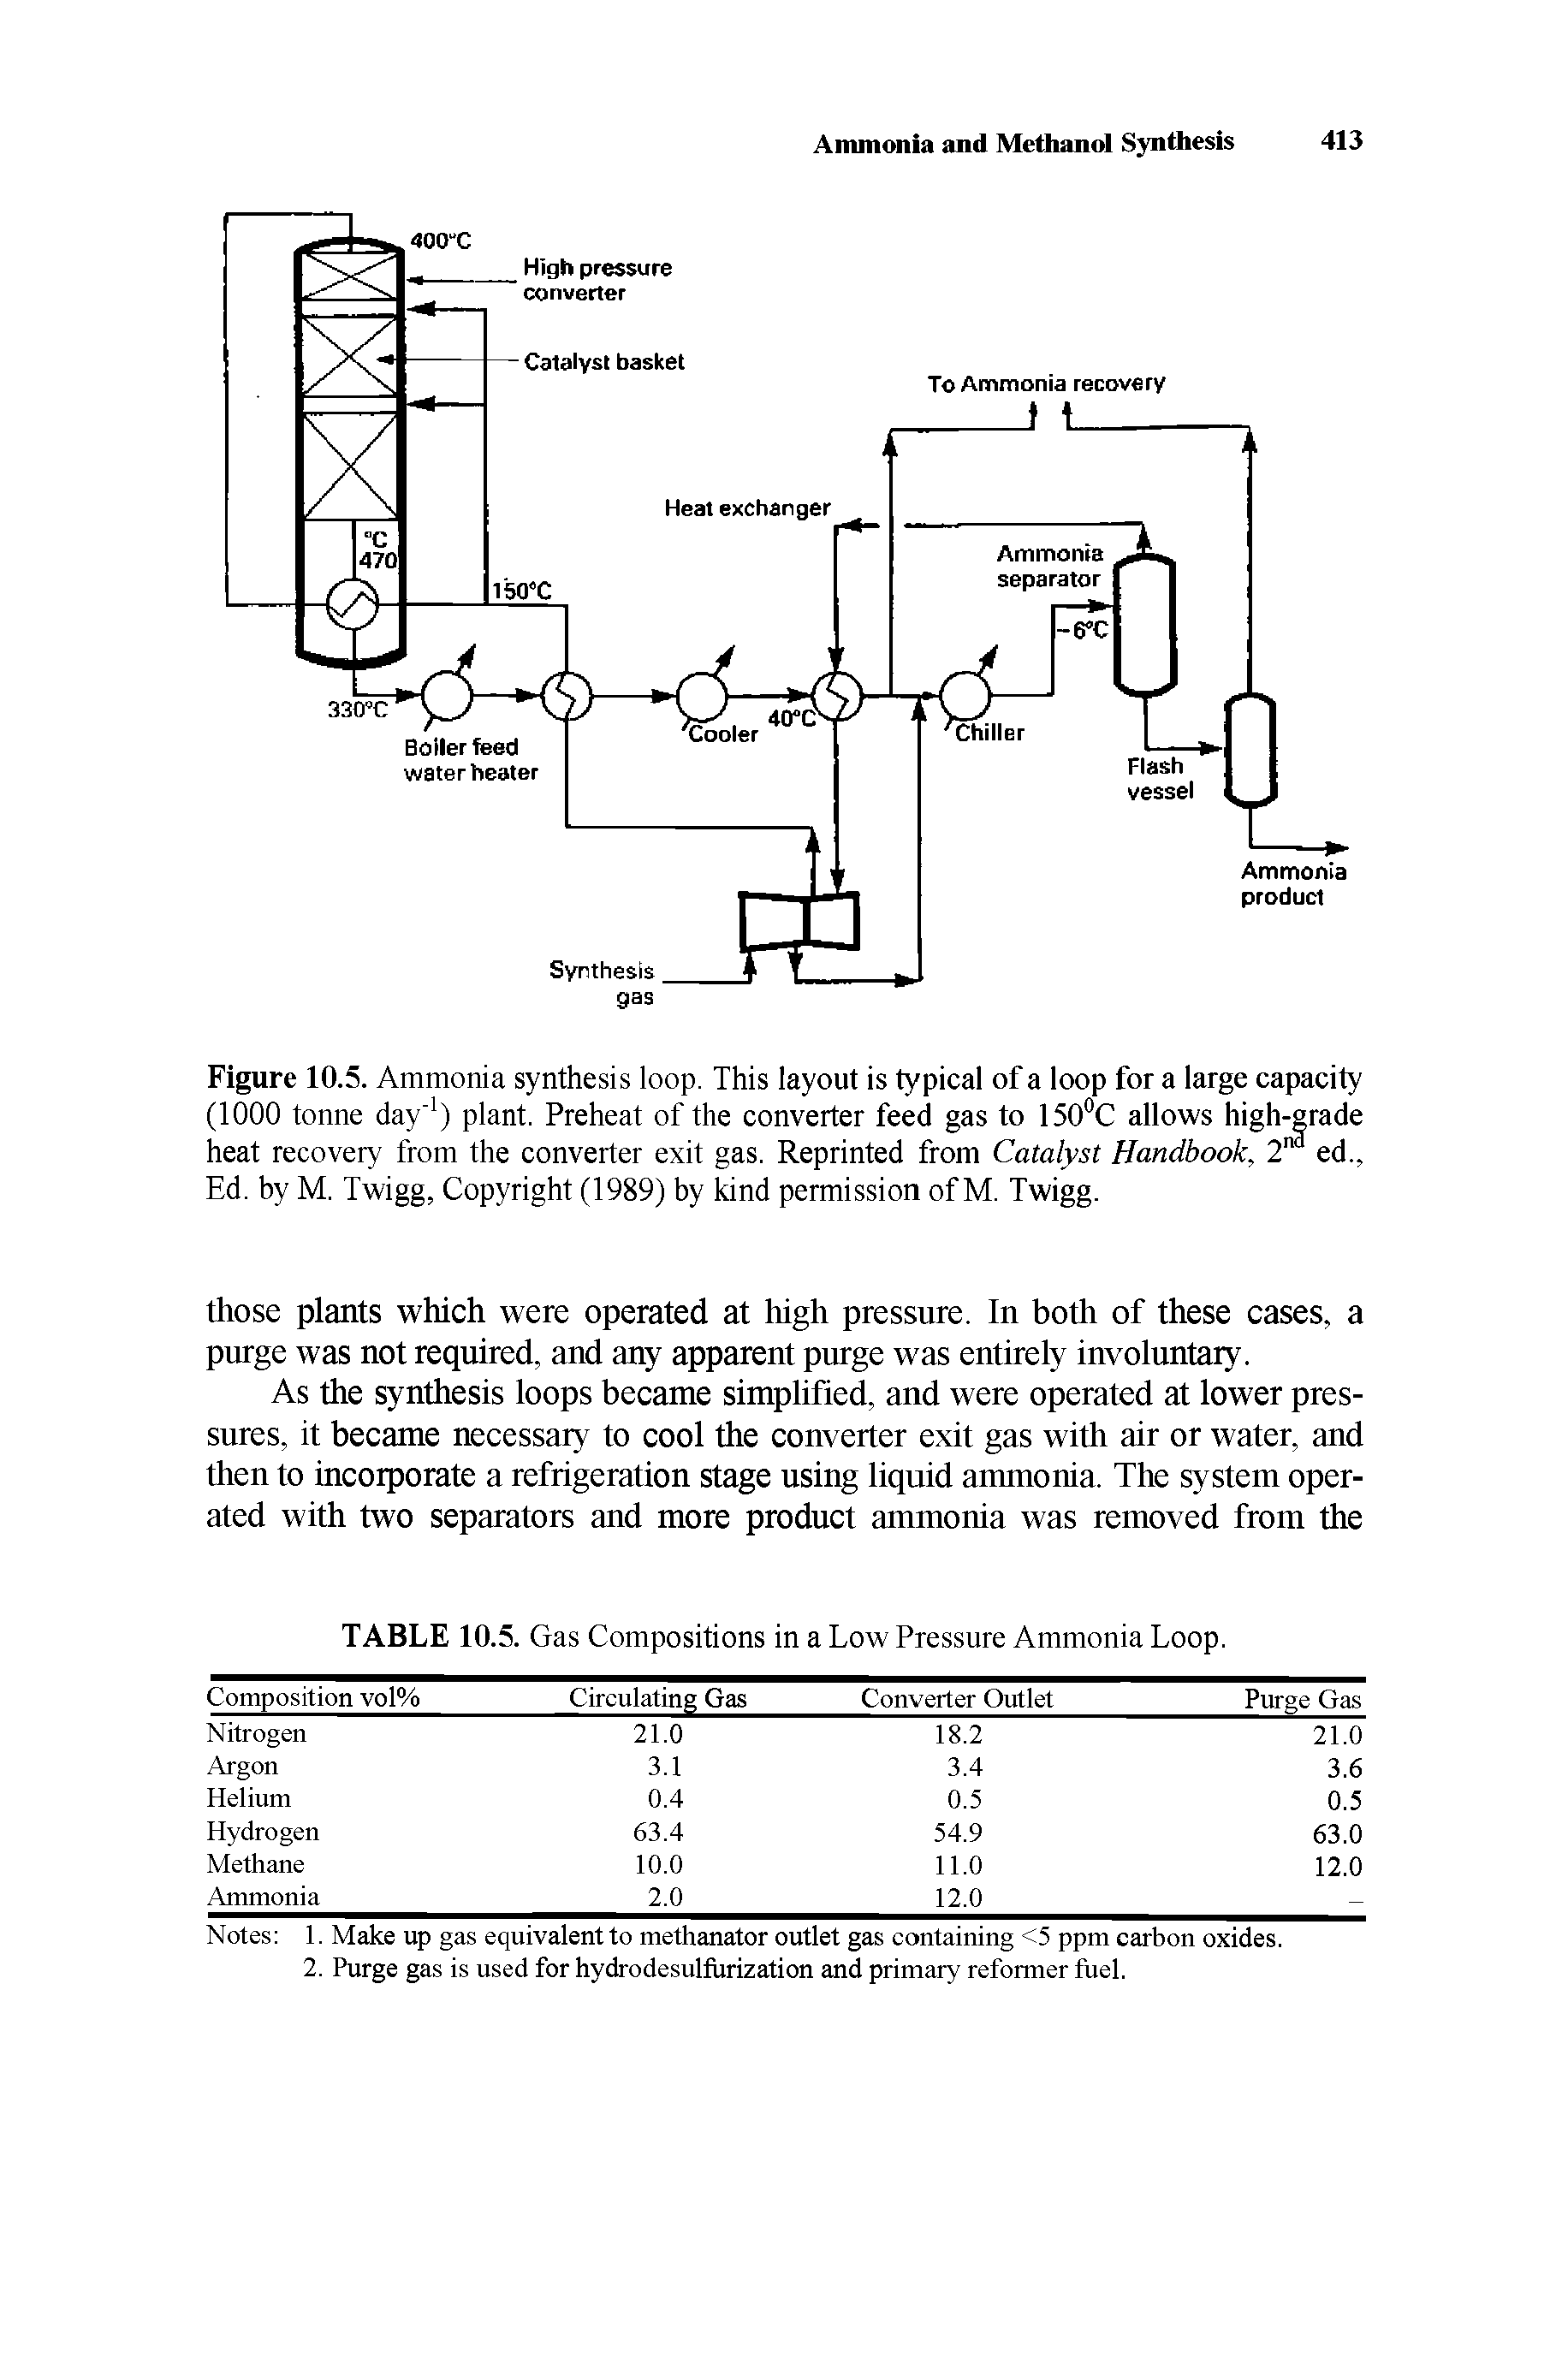 Figure 10.5. Ammonia synthesis loop. This layout is typical of a loop for a large capacity (1000 tonne day ) plant. Preheat of the converter feed gas to 150 C allows high-grade heat recovery from the converter exit gas. Reprinted from Catalyst Handbook, 2 ed., Ed. by M. Twigg, Copyright (1989) by kind permission of M. Twigg.